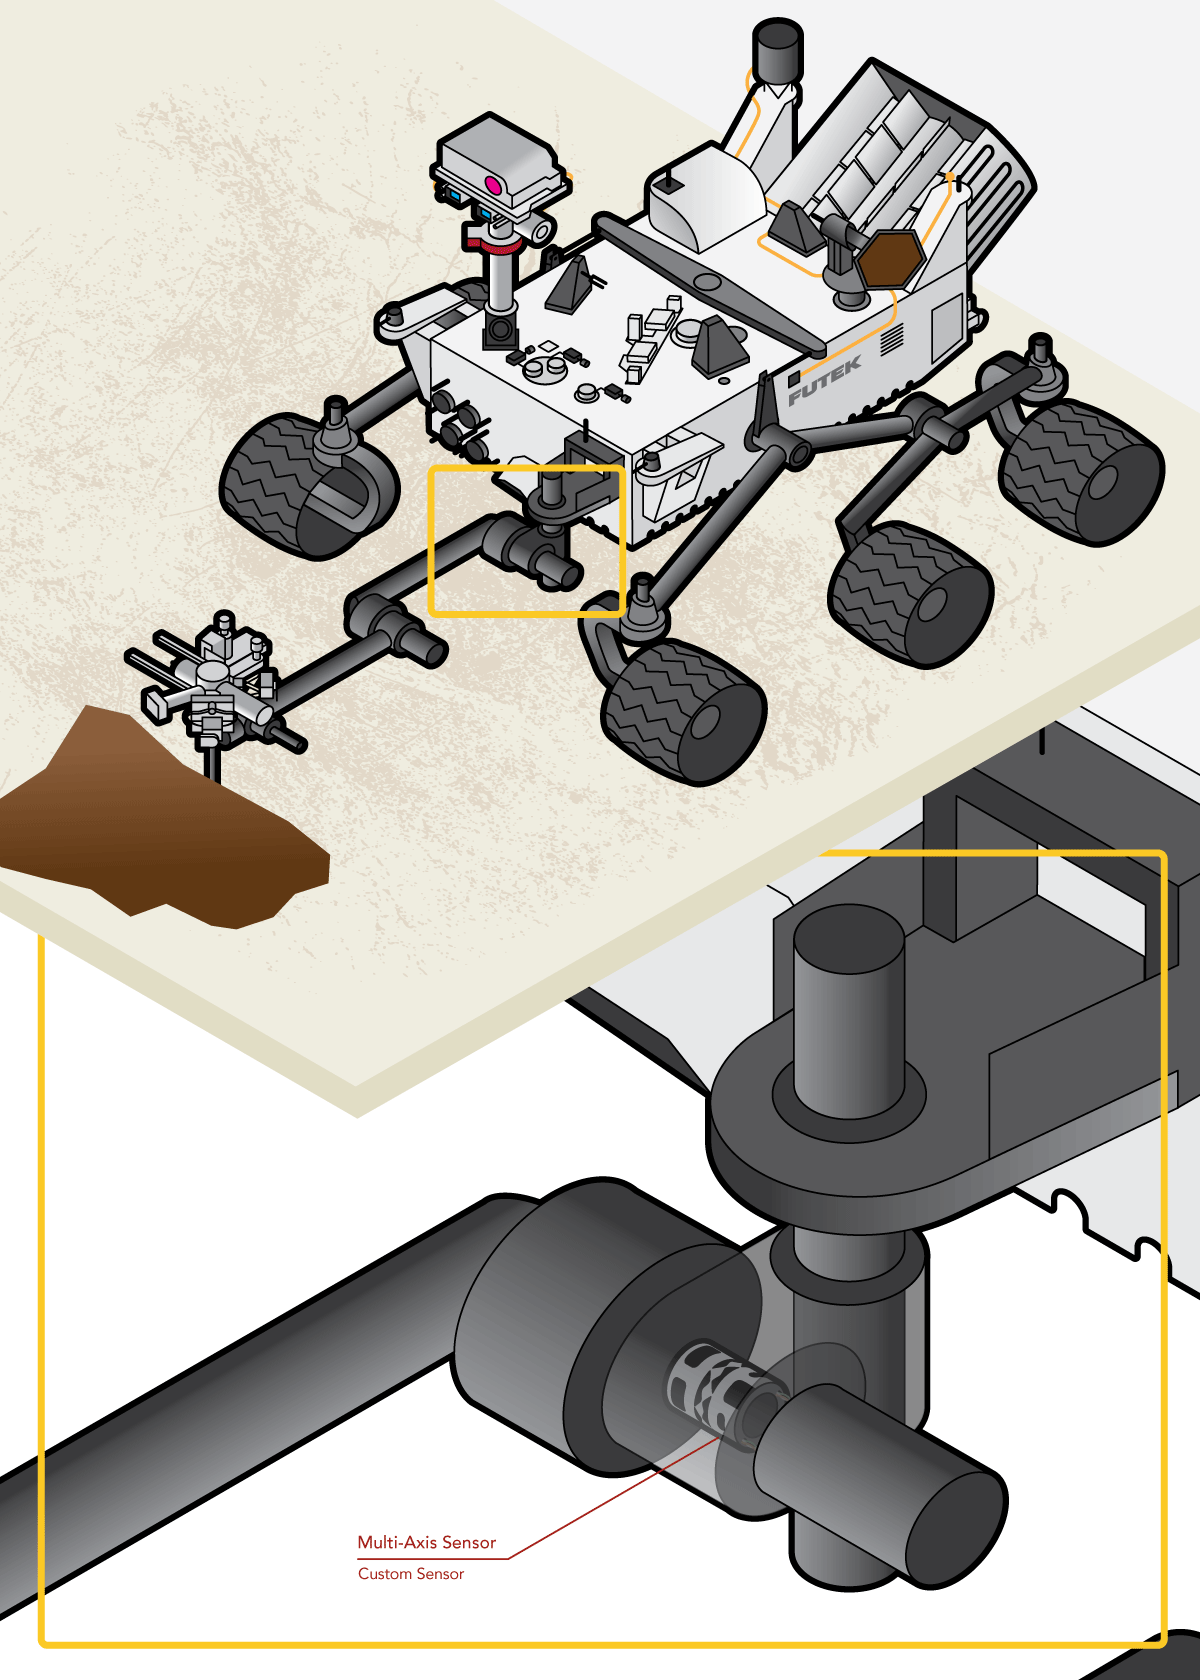 MSL Mars Rover Cryogenic Multi-Axis